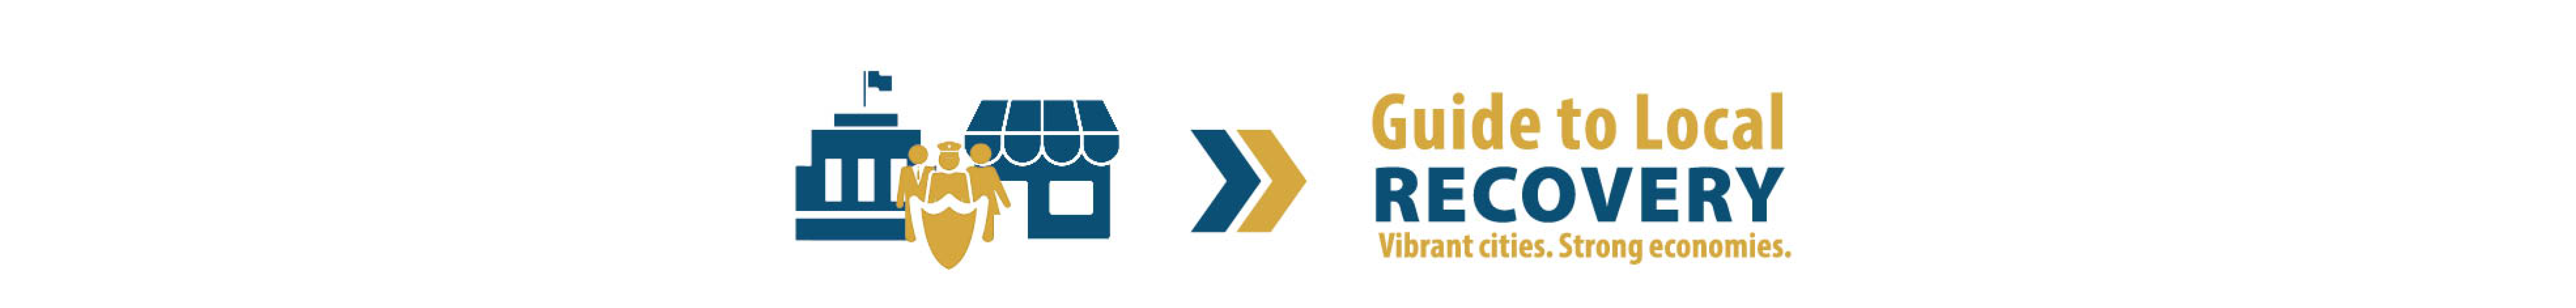 Guide to Local Recovery logo banner